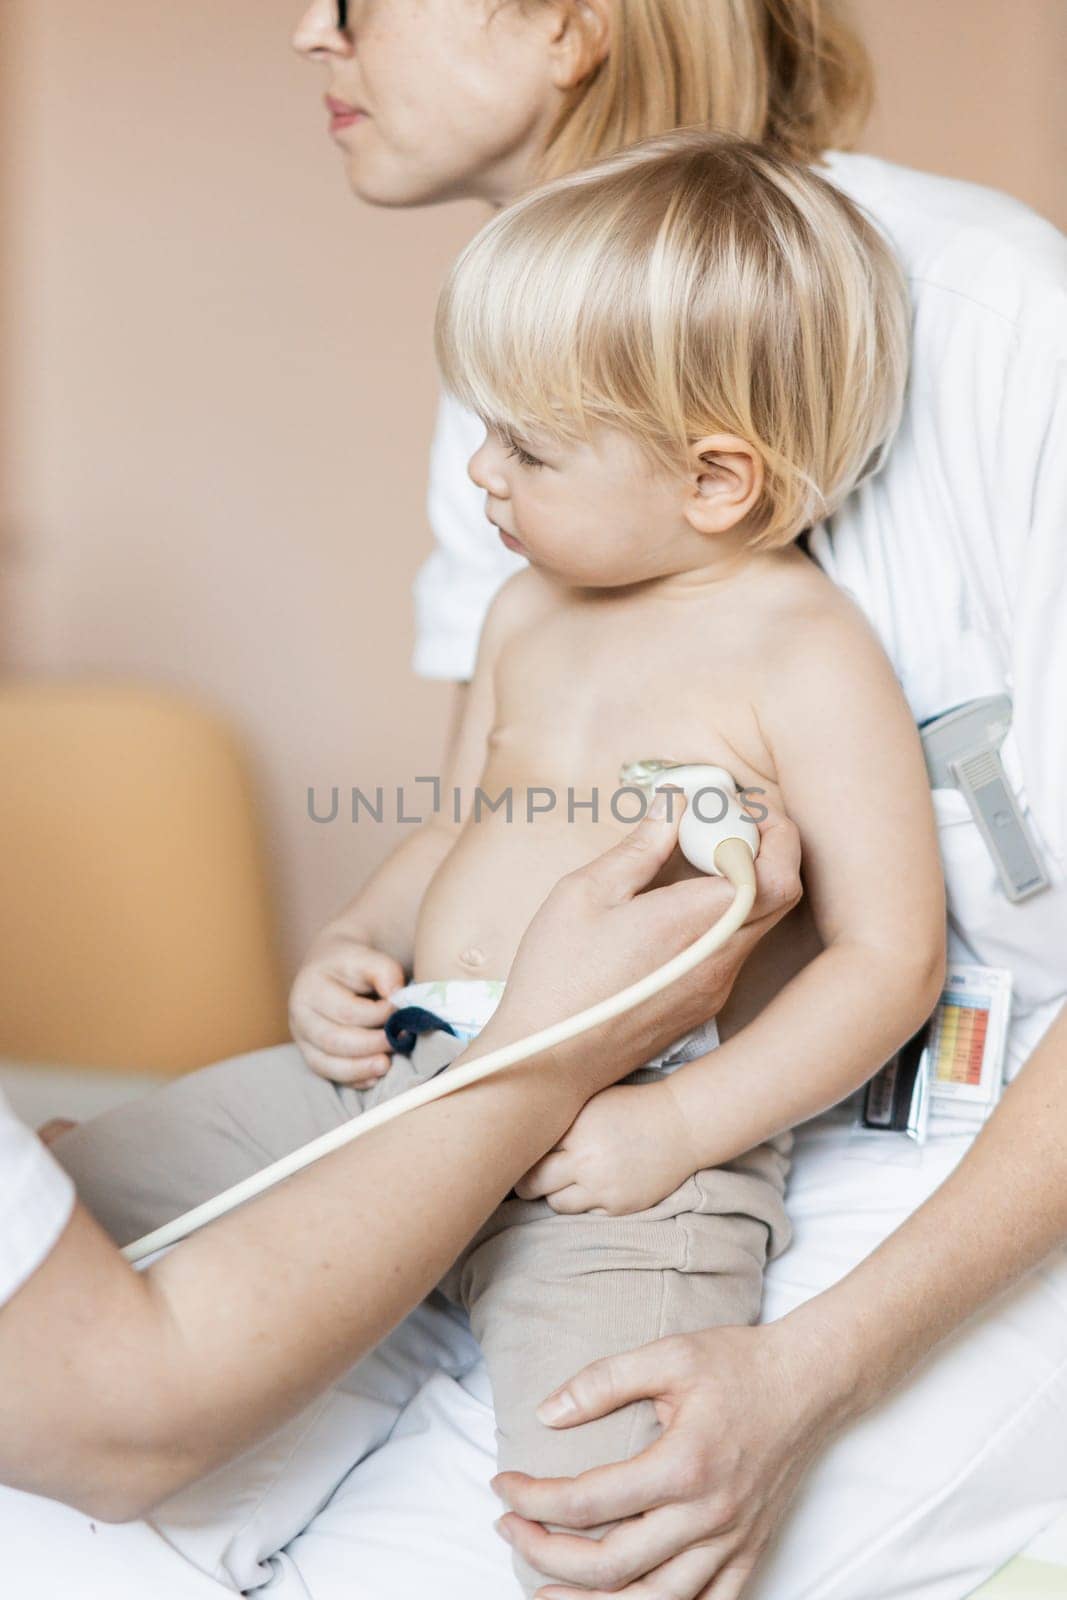 Small child being checked for heart murmur by heart ultrasound exam by cardiologist as part of regular medical checkout at pediatrician